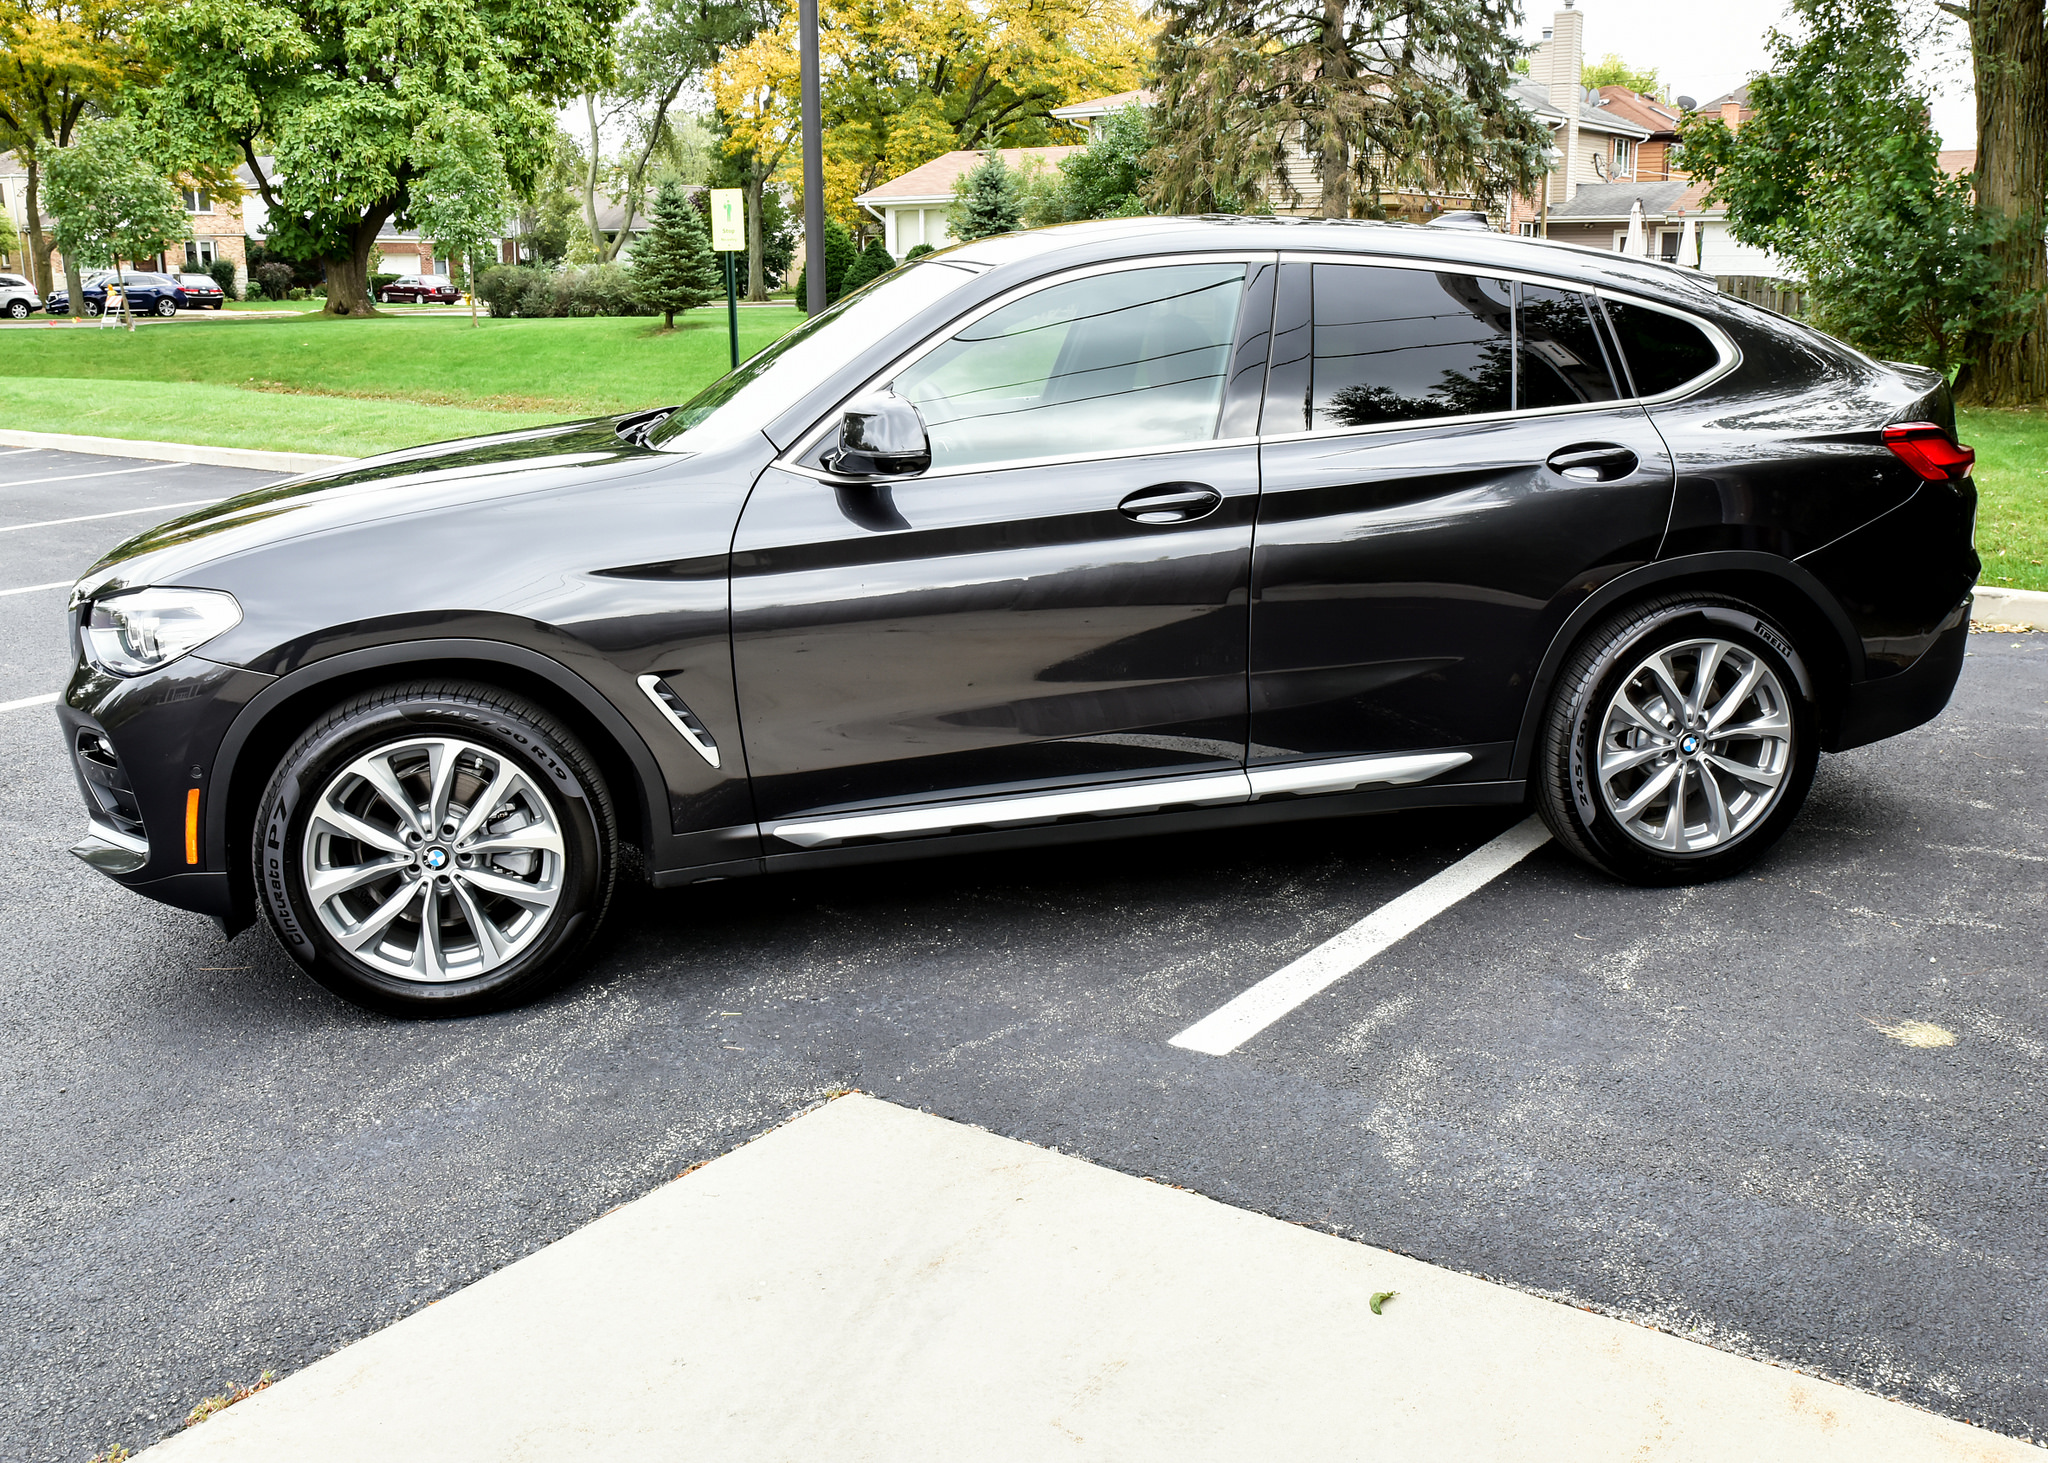 Party in the front, pain in the back: The BMW X4 reviewed | Ars Technica